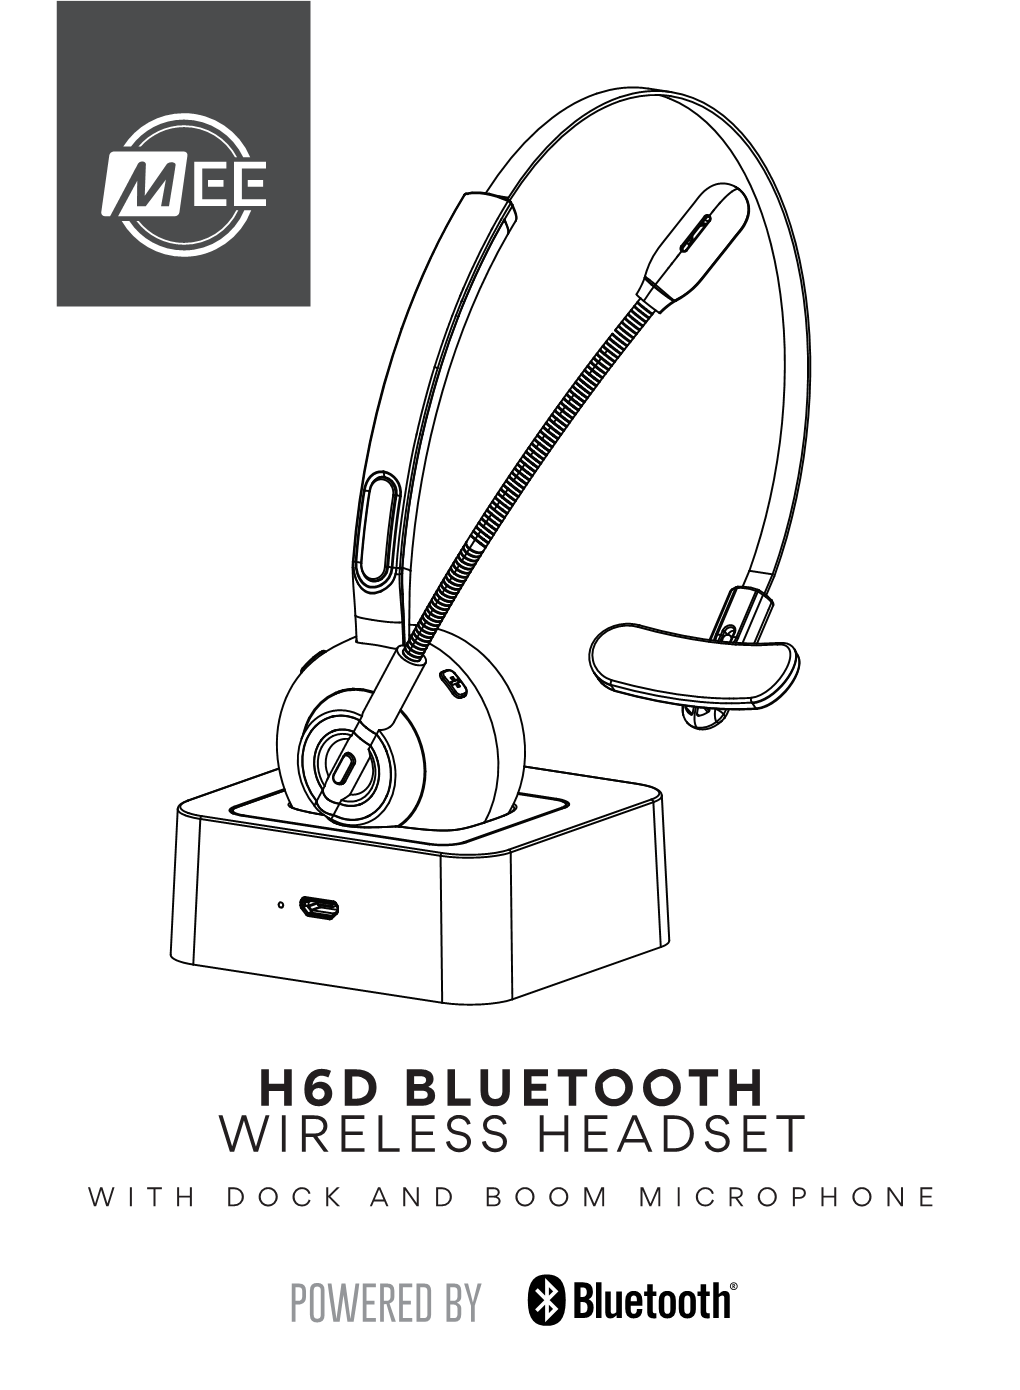 H6d Bluetooth Wireless Headset with Dock and Boom Microphone